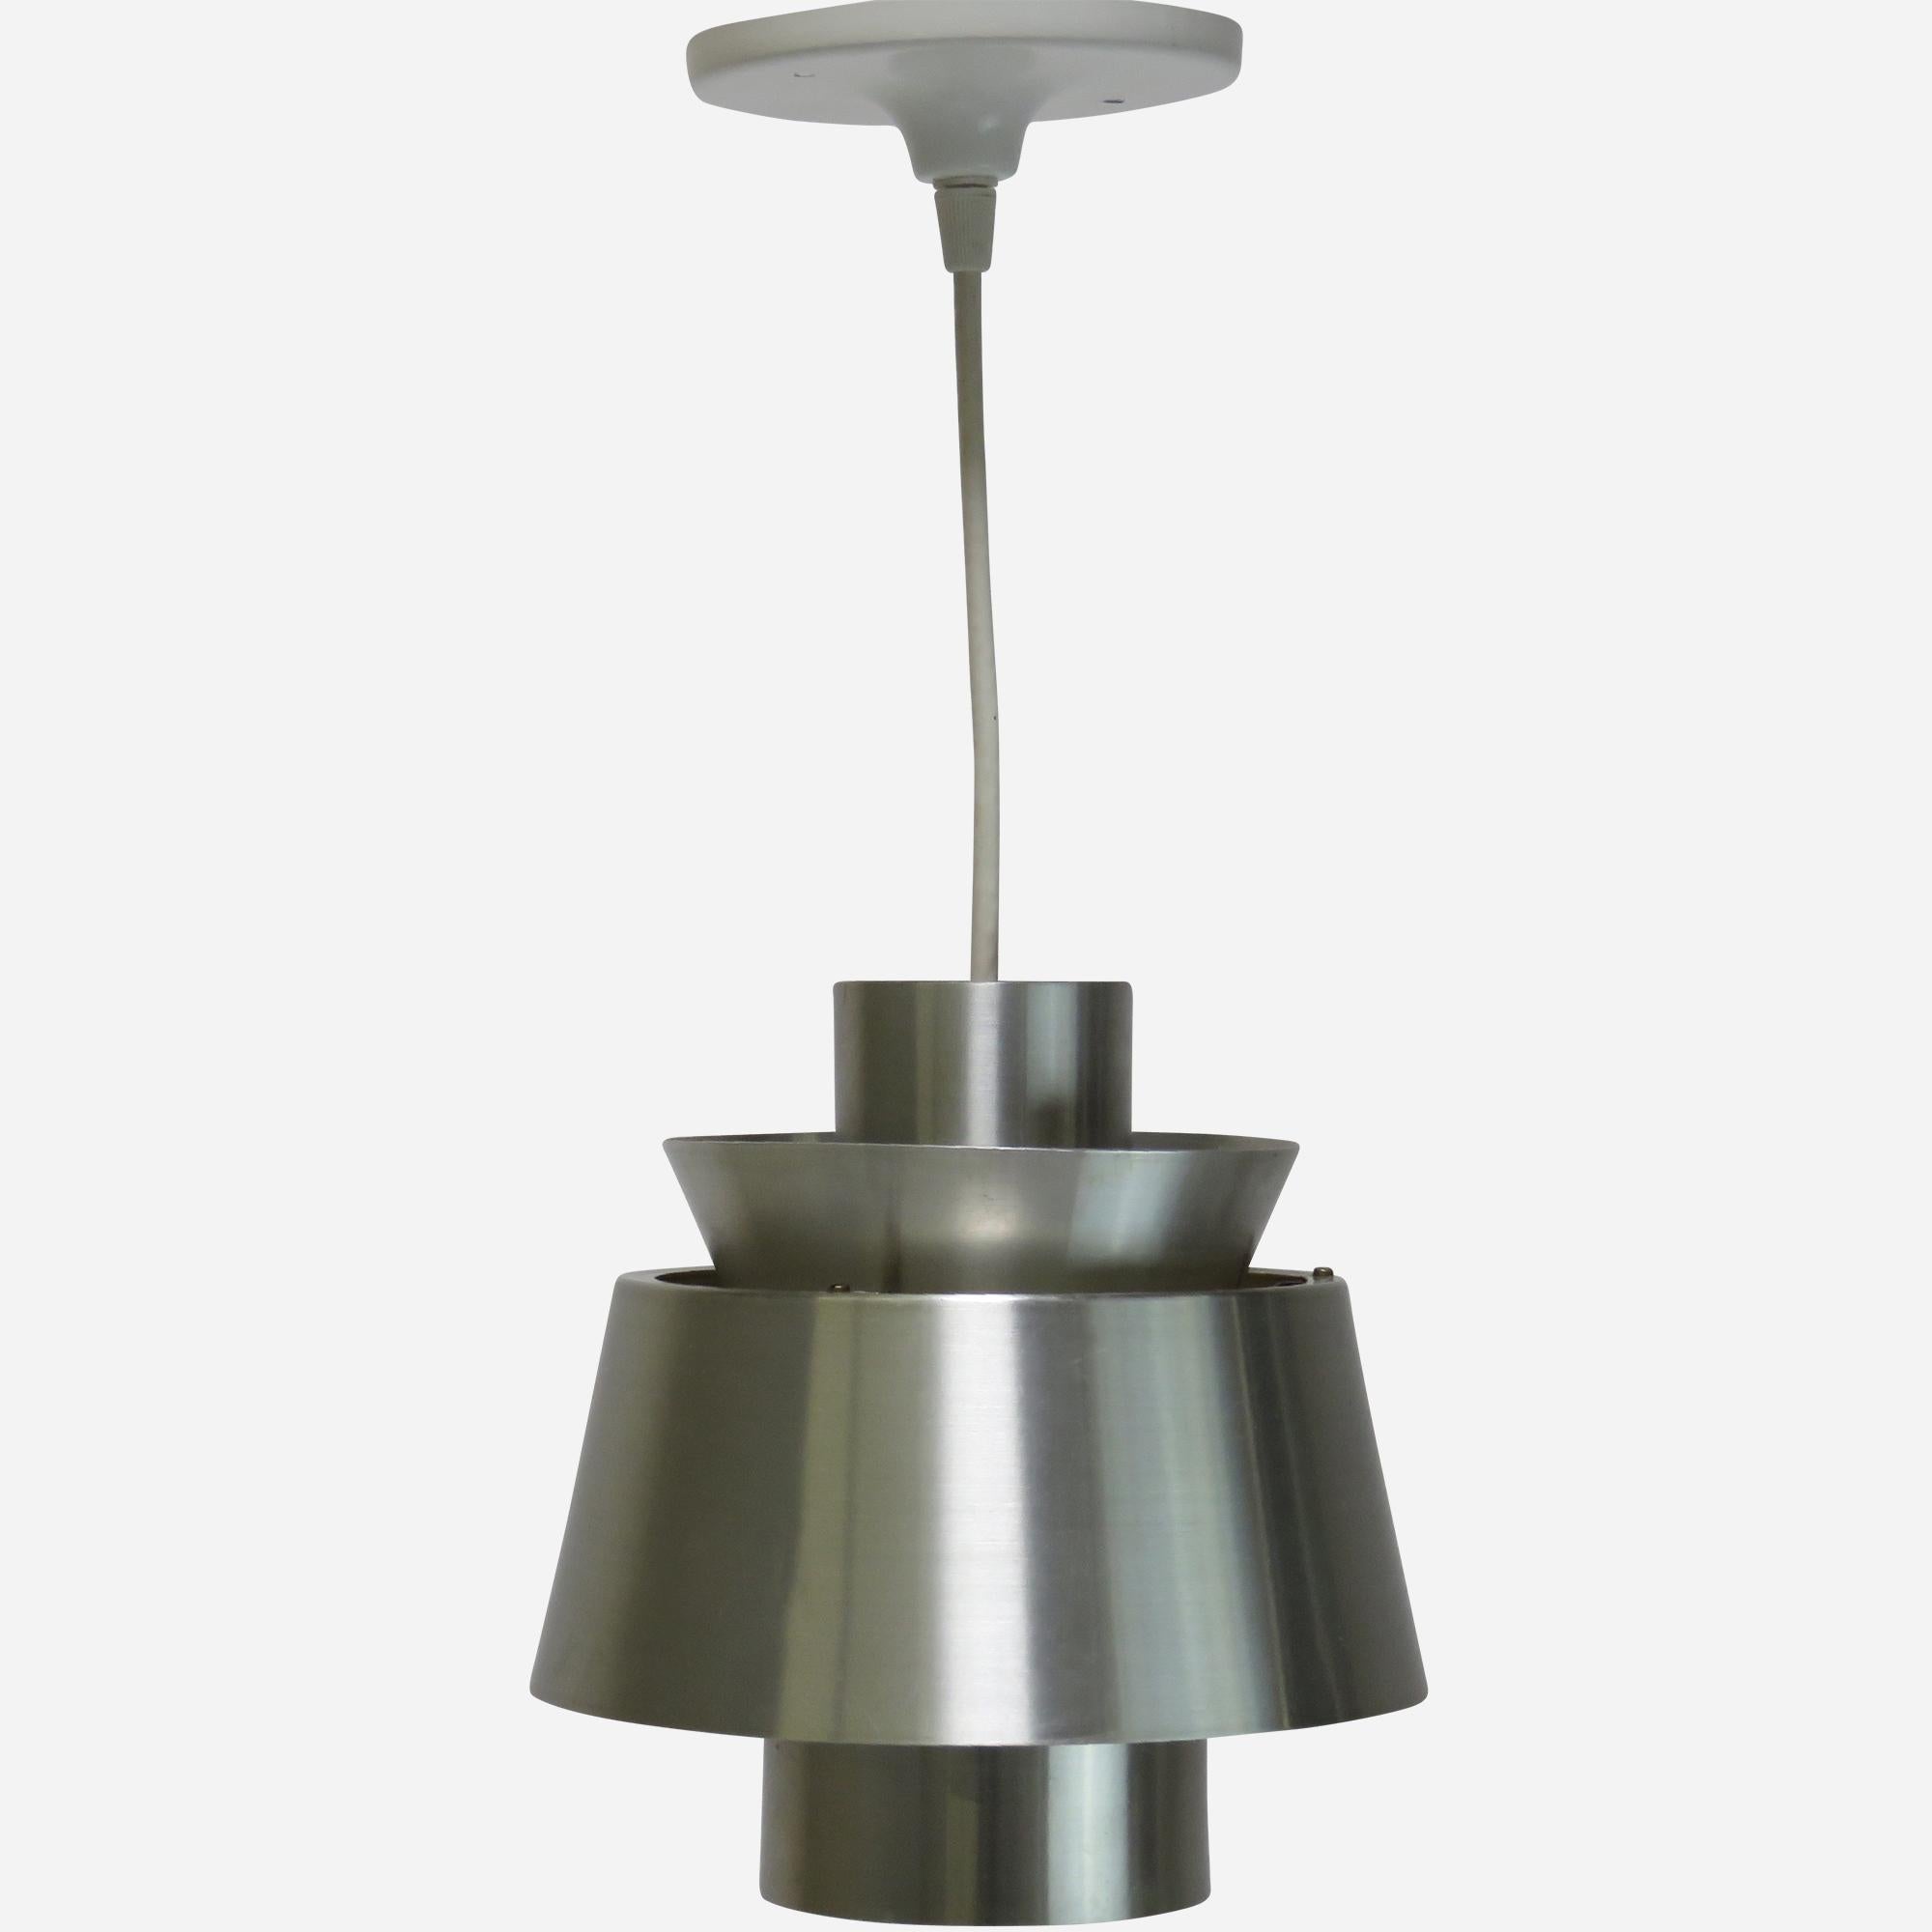 A spun aluminum pendant lamp. Designed in 1947 for the Tivoli amusement park in Copenhagen and became known by the same name. Decades later Nordisk Solar lost the rights to call it 'Tivoli' and it was then re-named 